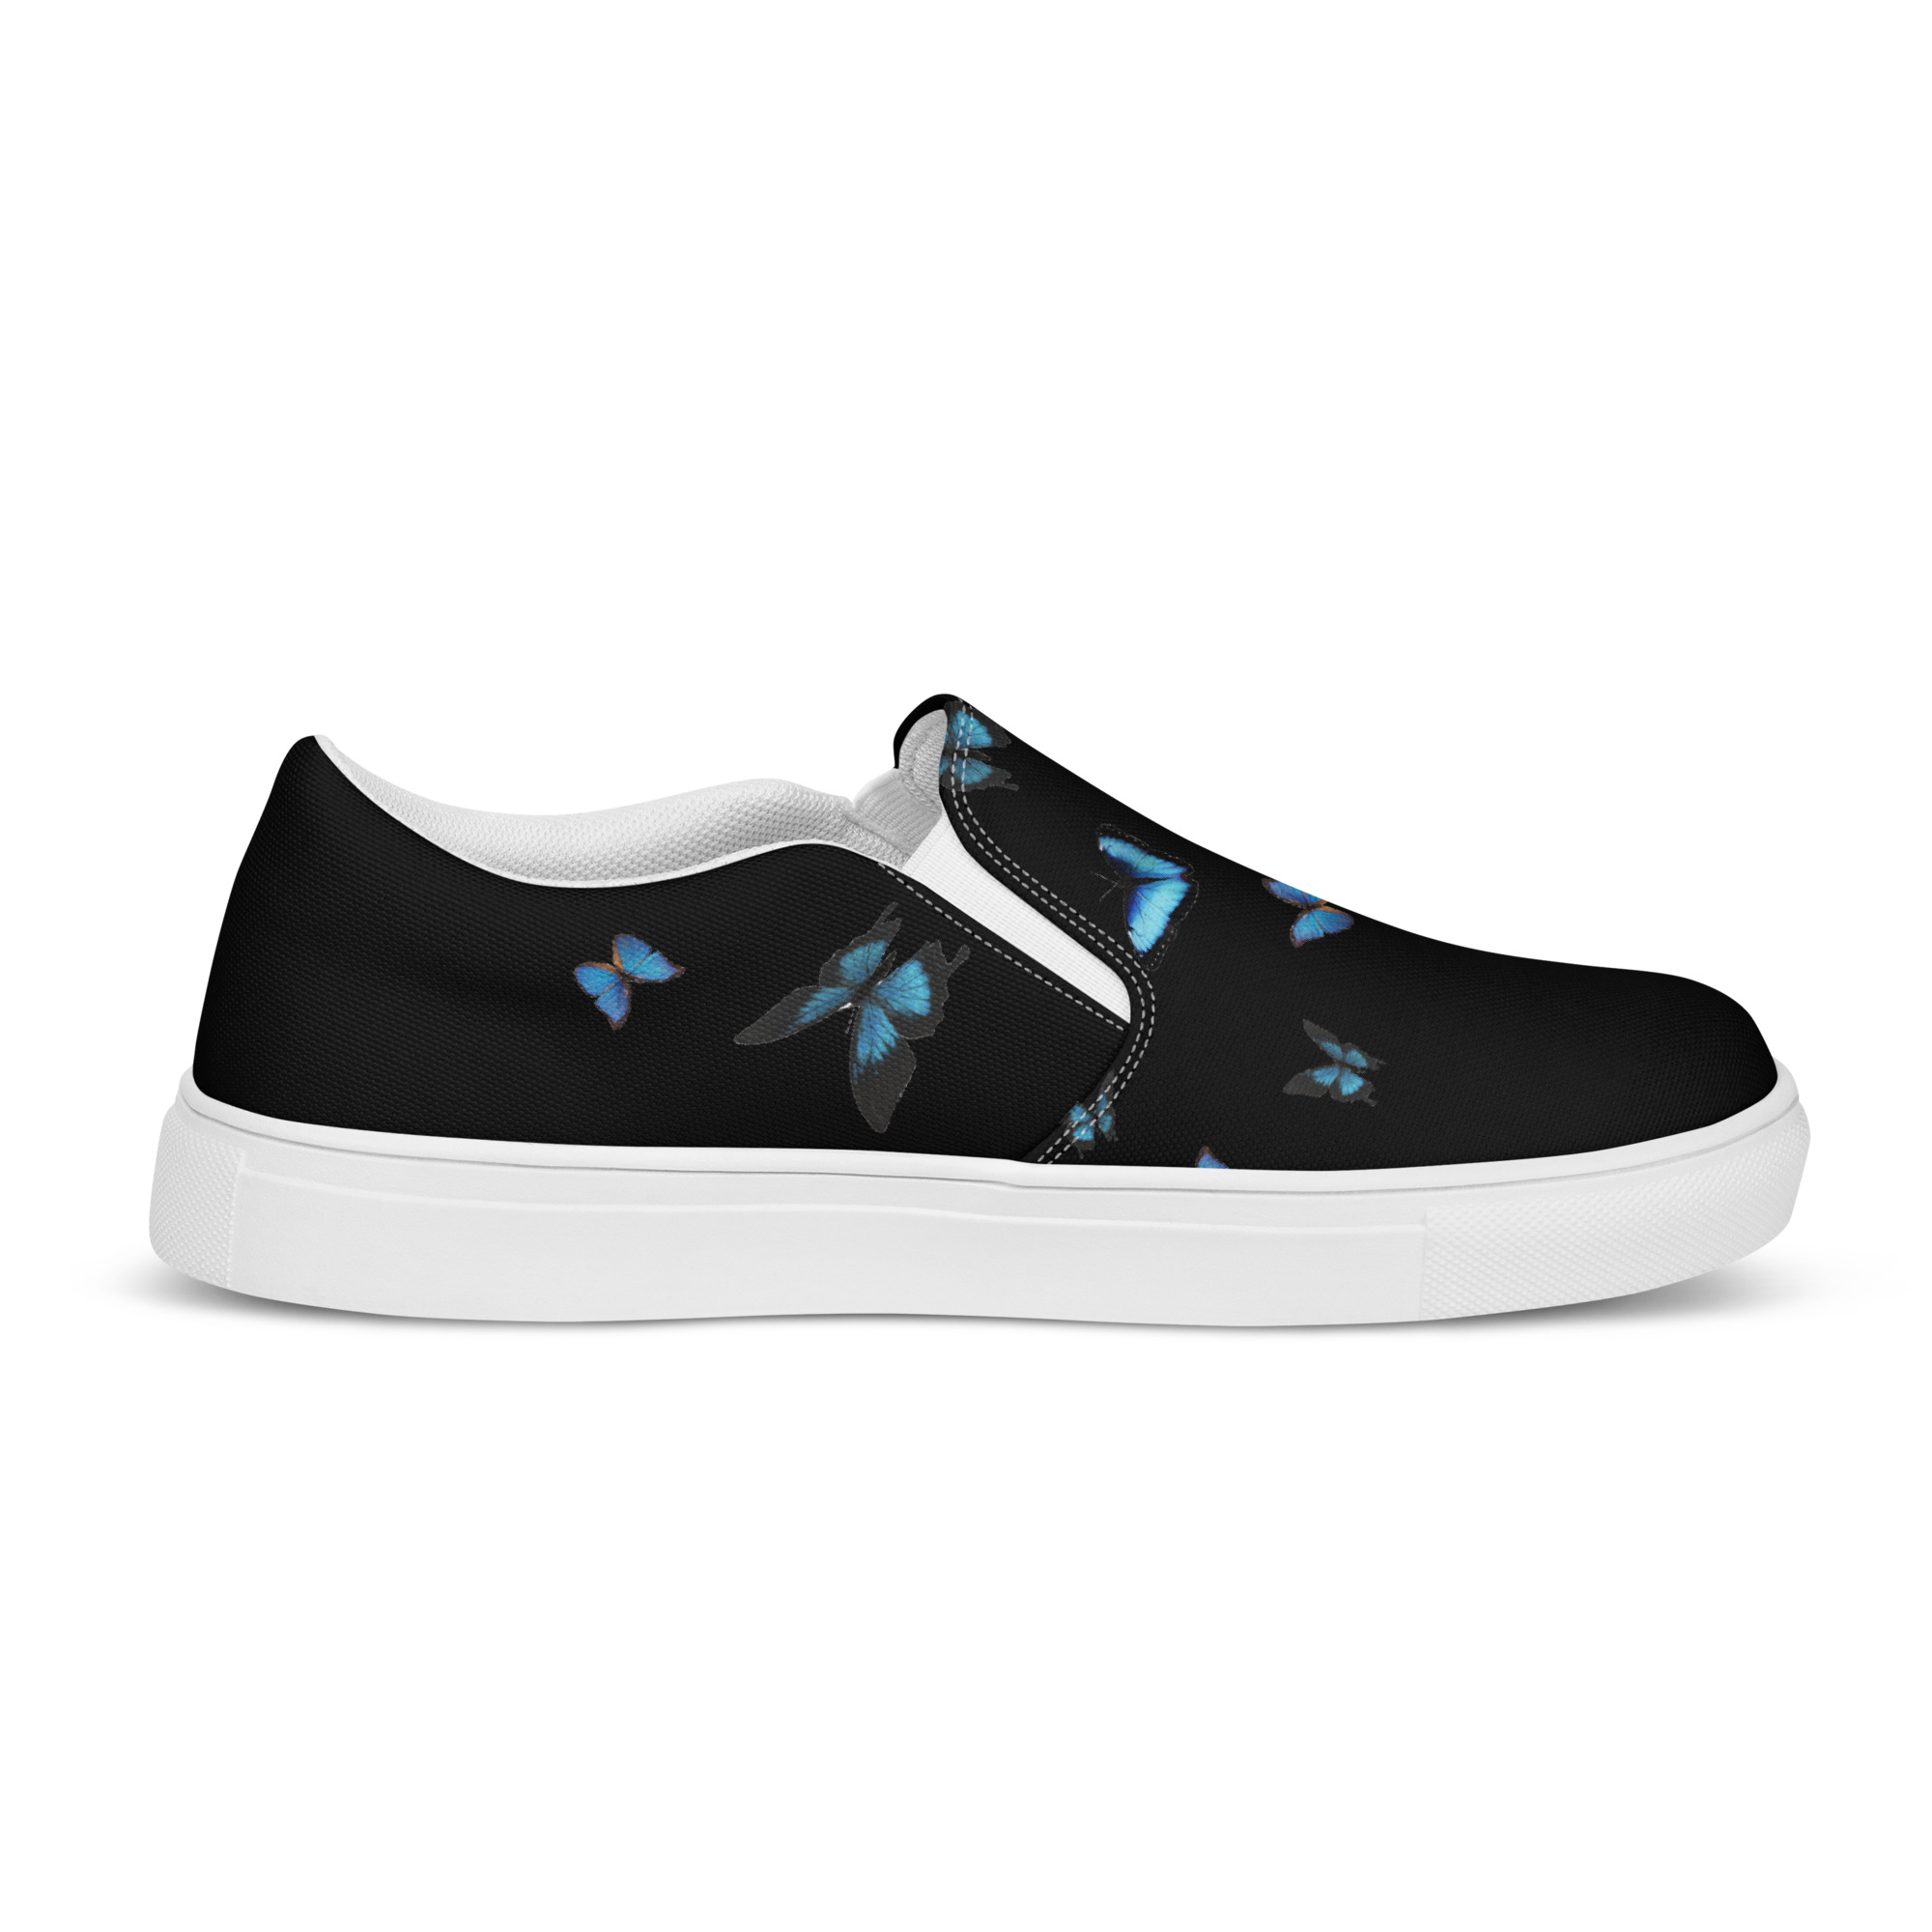 YEP with Blue Butterflies Black slip-on canvas shoes (Men’s sized)